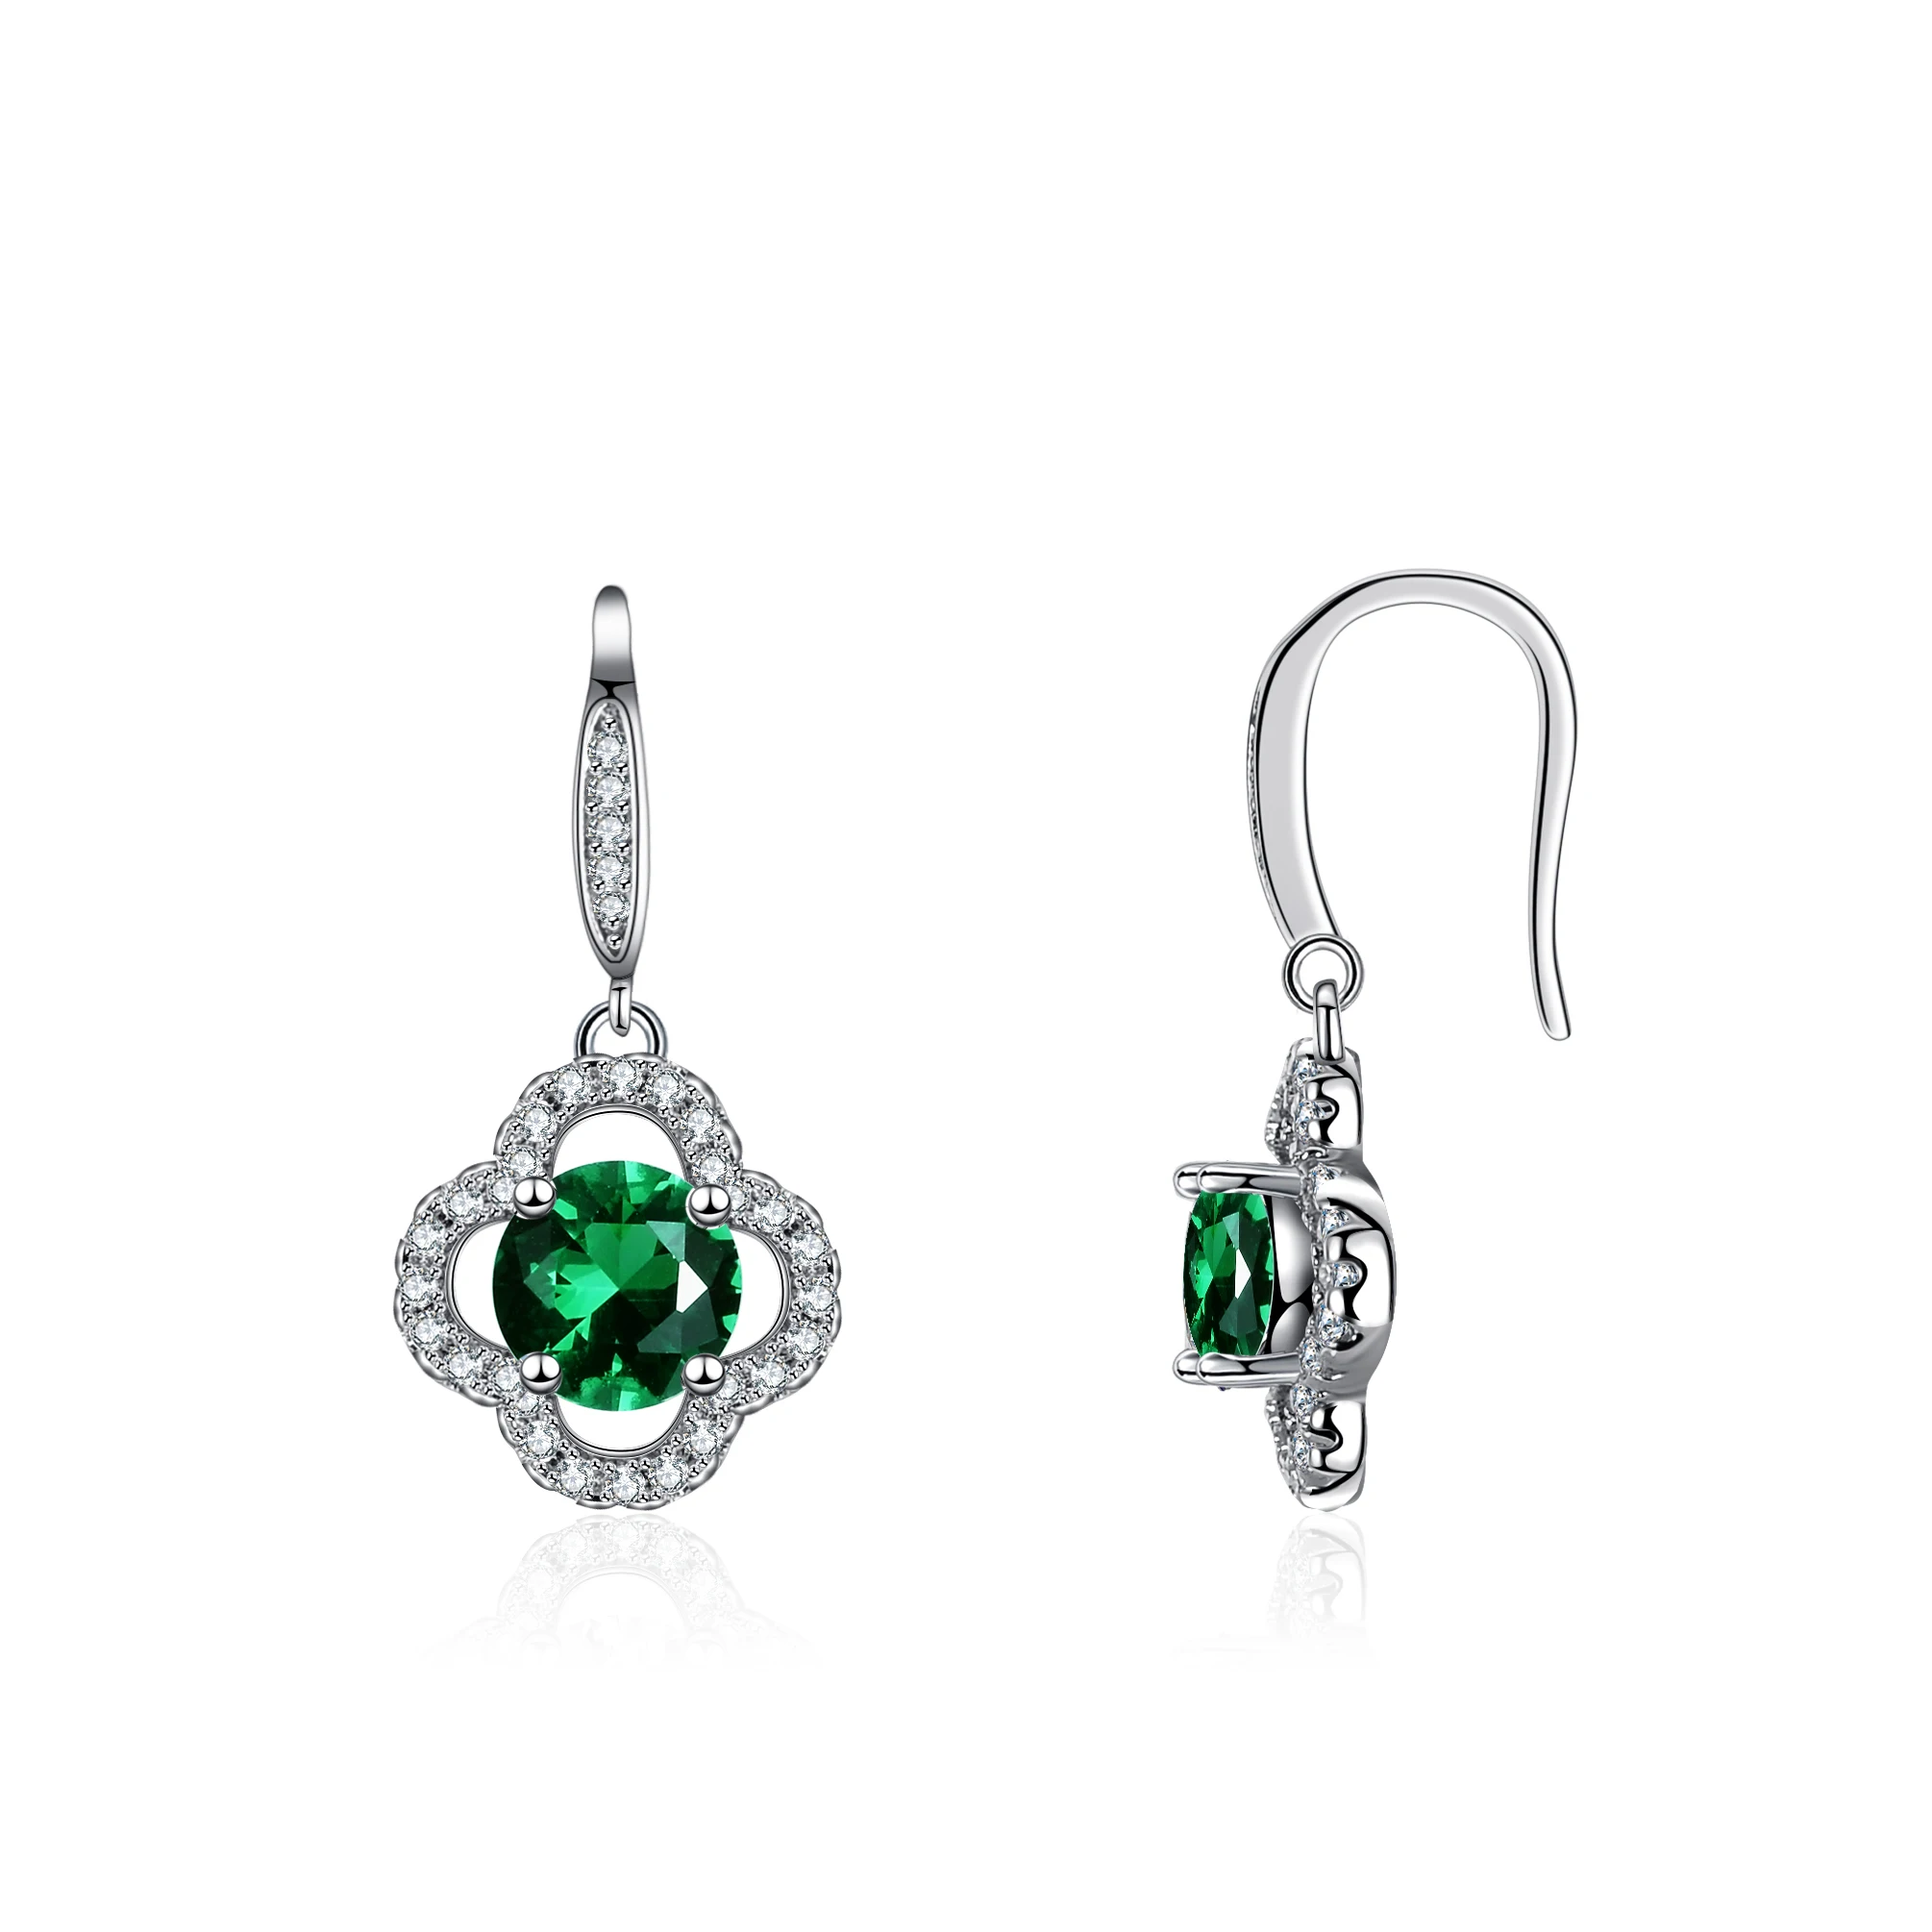 Popular 925 Sterling Silver Luxury Halo Earrings with High Quality Cubic Zirconia and Colorful Gemstone Fine Jewelry Earrings